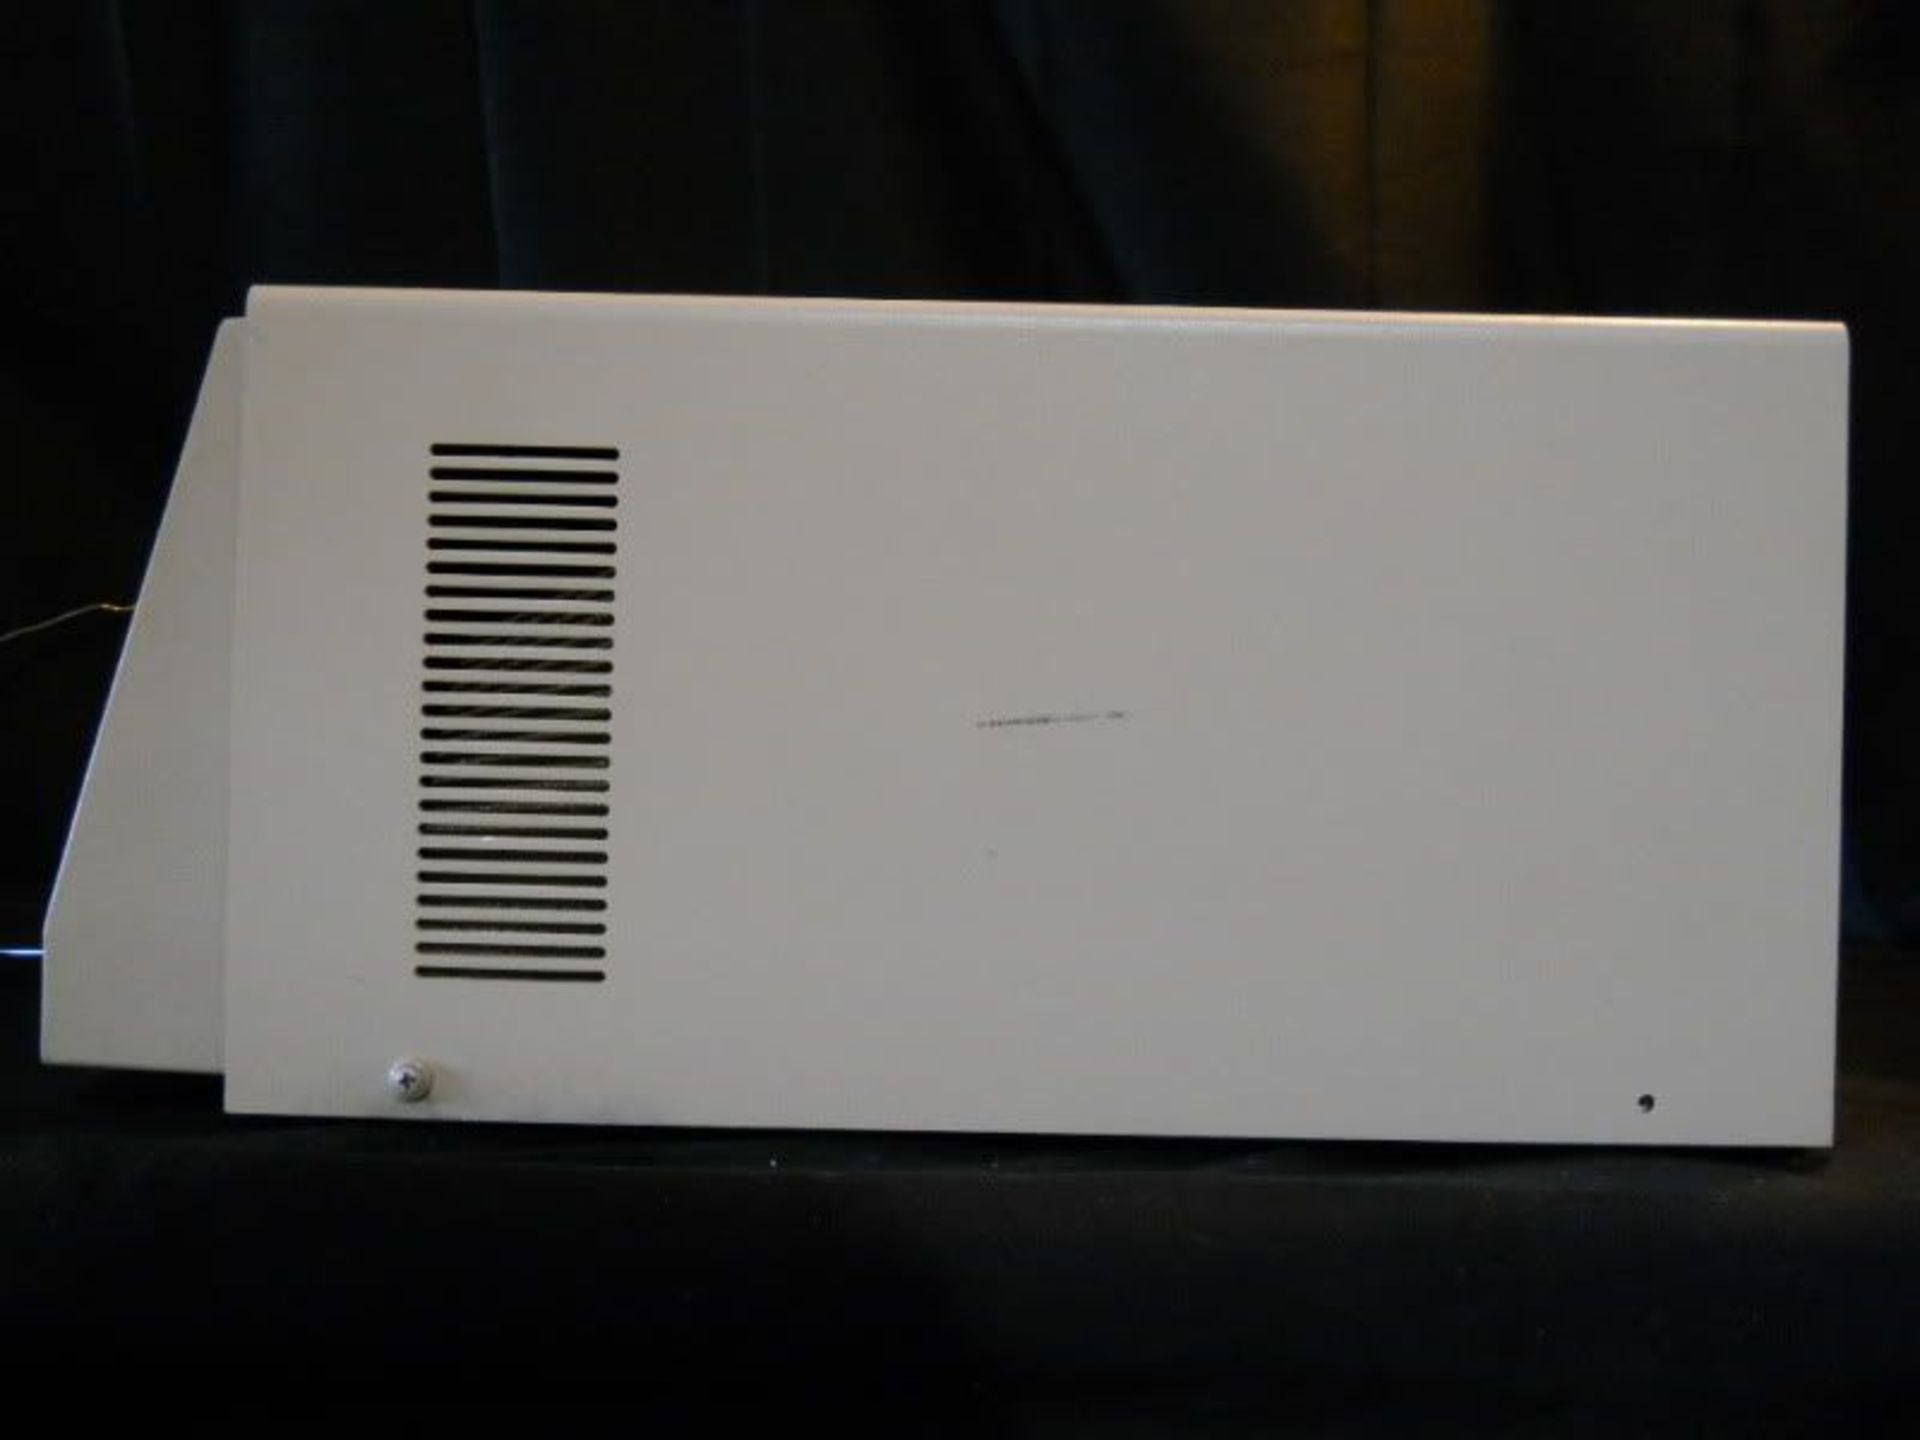 Millipore Waters 484 Tunable Absorbance Detector HPLC, Qty 1, 221177707627 - Image 4 of 7